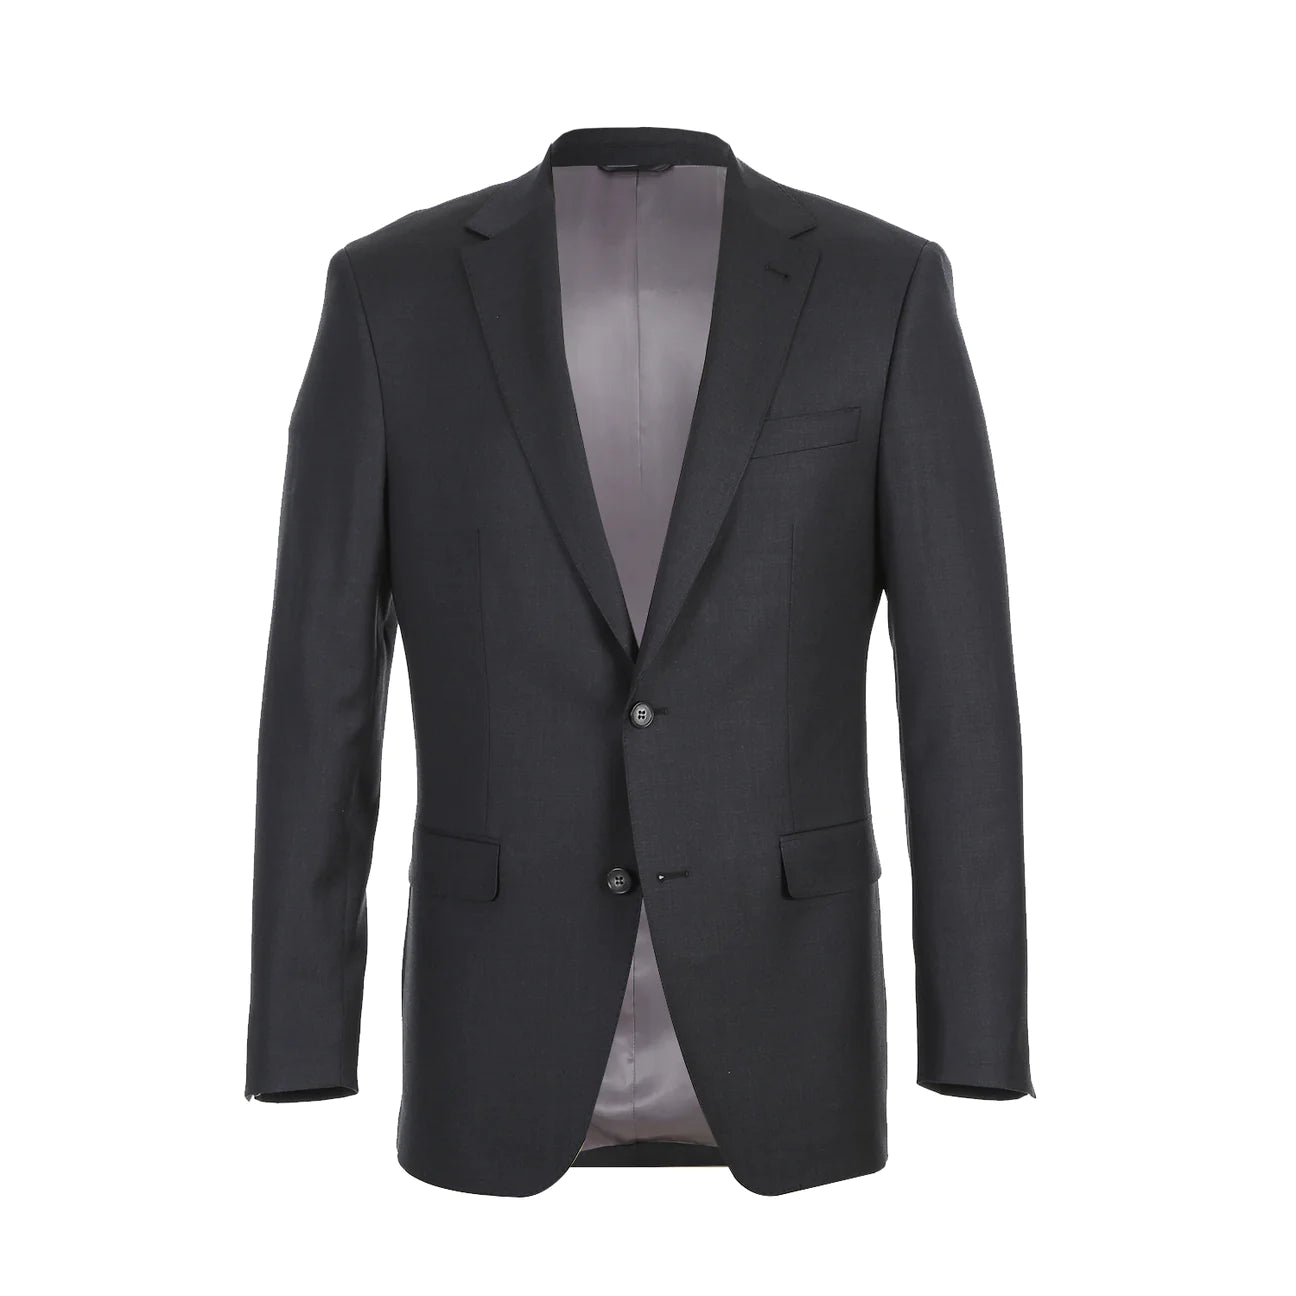 Rivelino Modern Fit Super 150's Wool Half Canvas Charcoal Suit